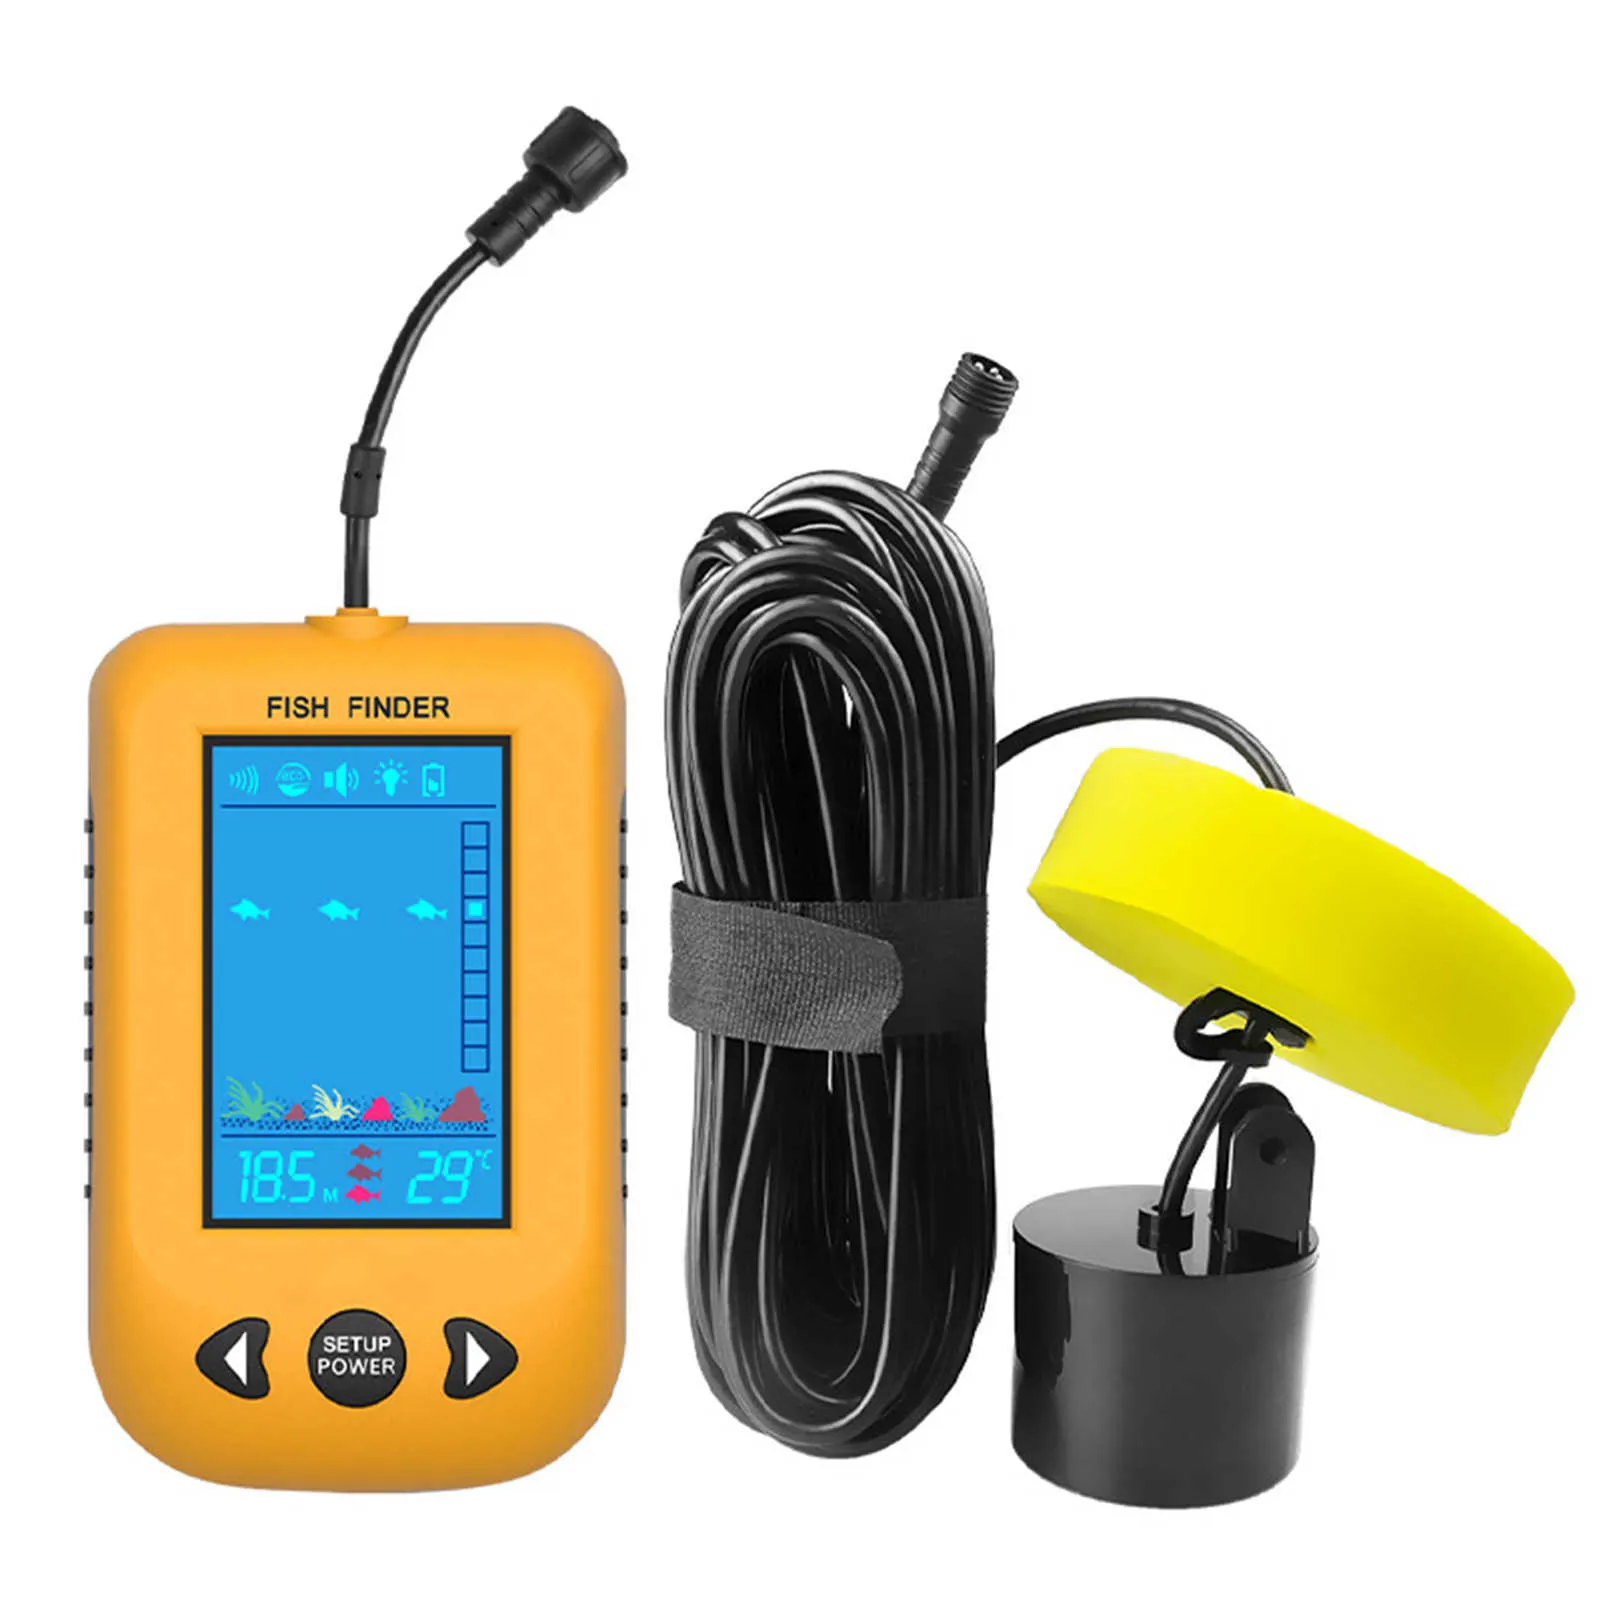 Portable Handheld Smart Fish Finder Bobber With Sonar Transducer Wired  Depth Finder For Kayaks And Boats HKD230703 From Fadacai06, $48.3